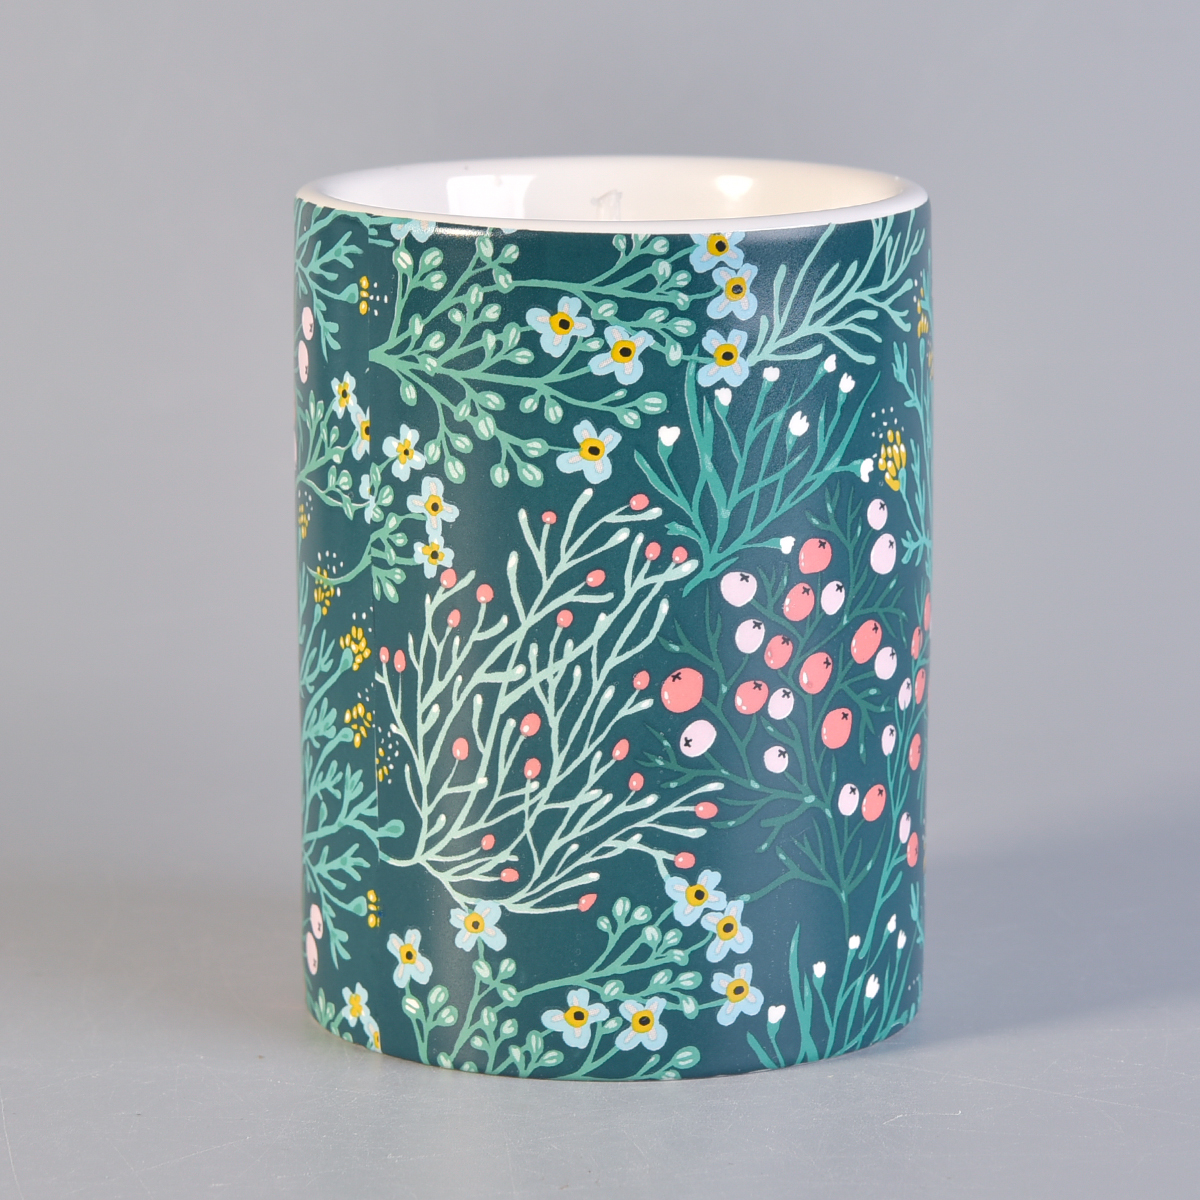 Ceramic candle holder with coloful print